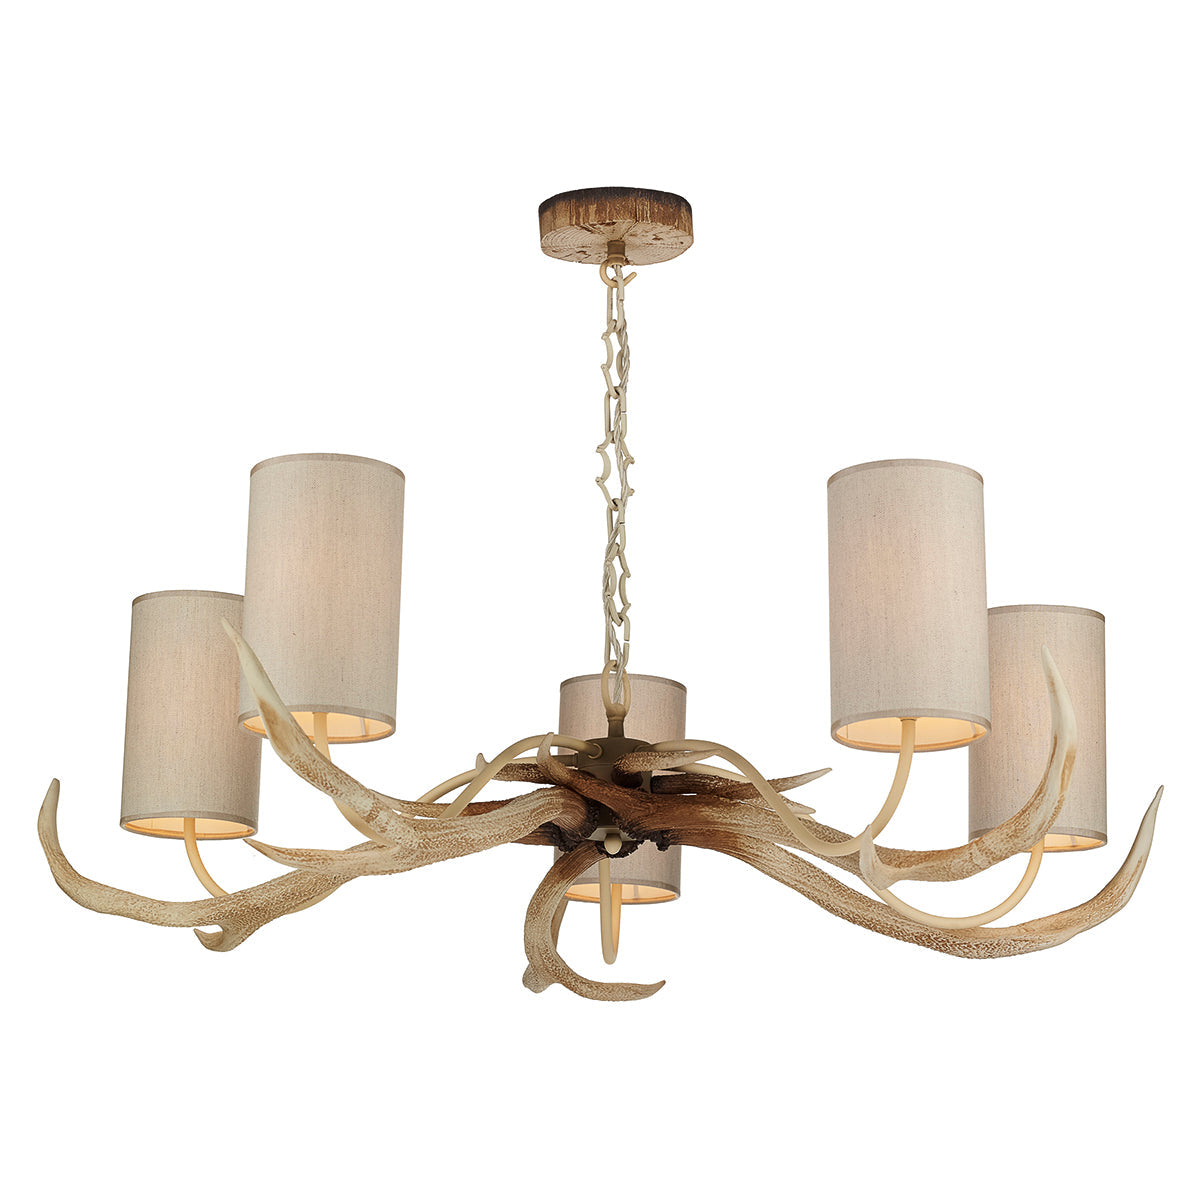 David Hunt Lighting Antler 5 Light Bleached Pendant Complete with Shades